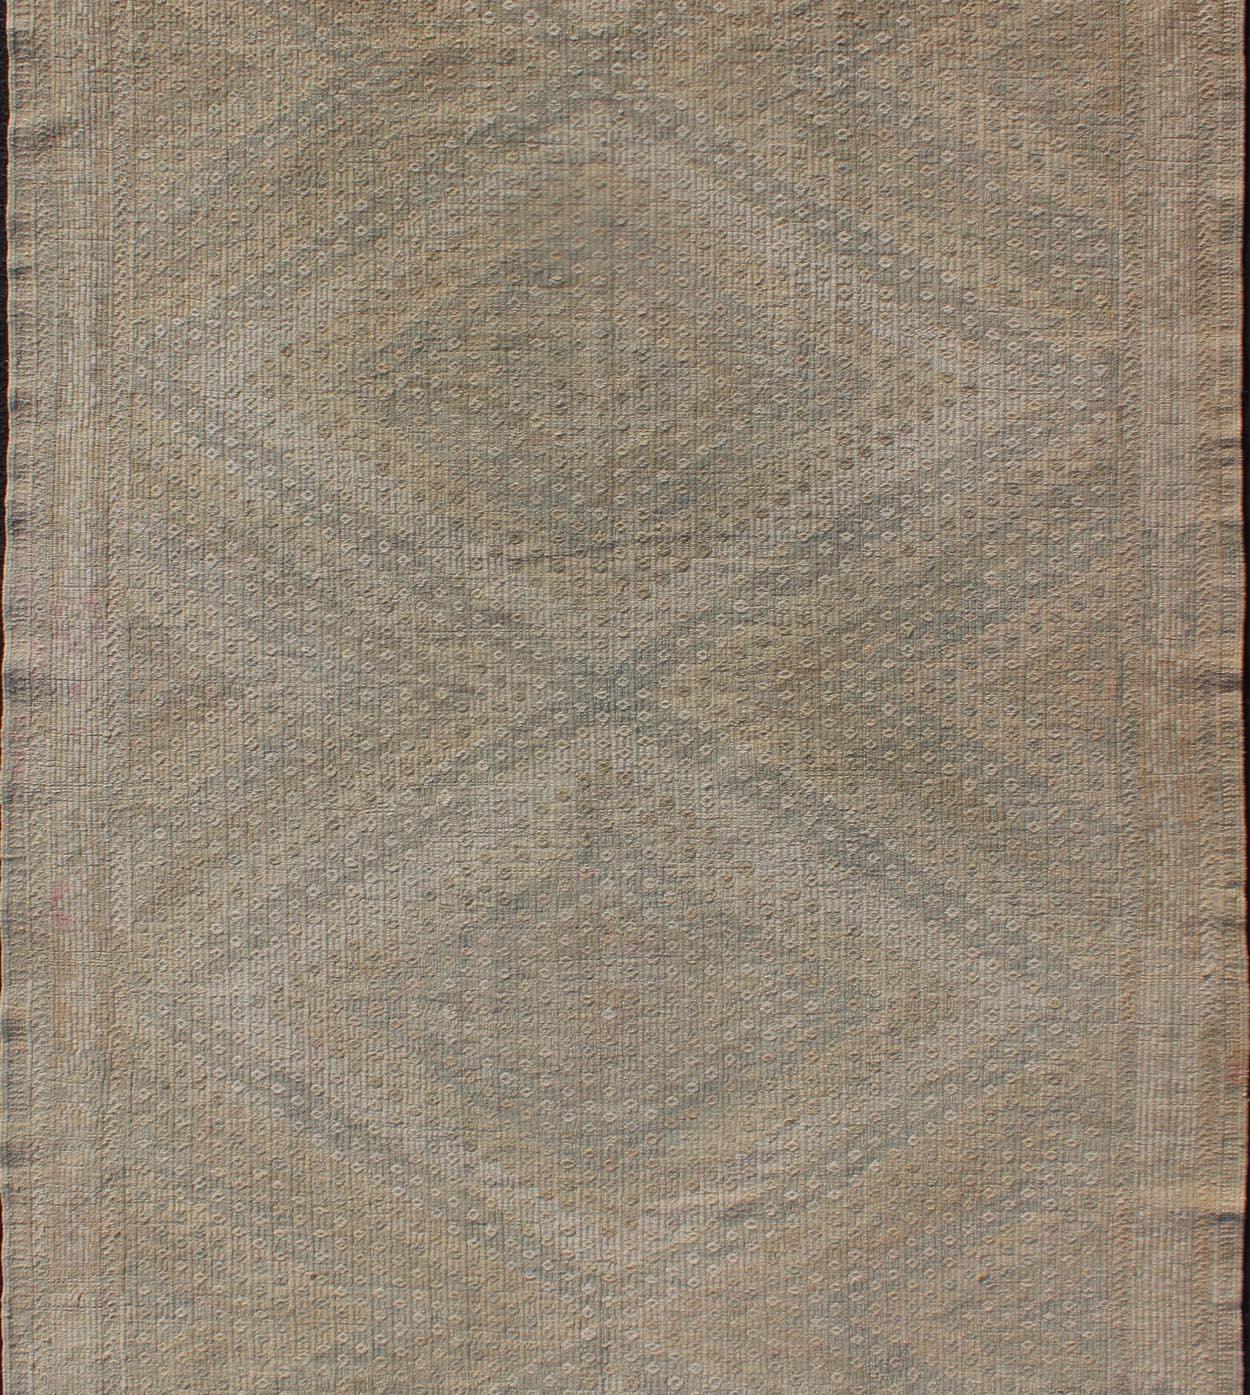 Hand-Woven Tan, Light Blue Vintage Turkish Embroidered Rug with Geometric Diamond Design For Sale